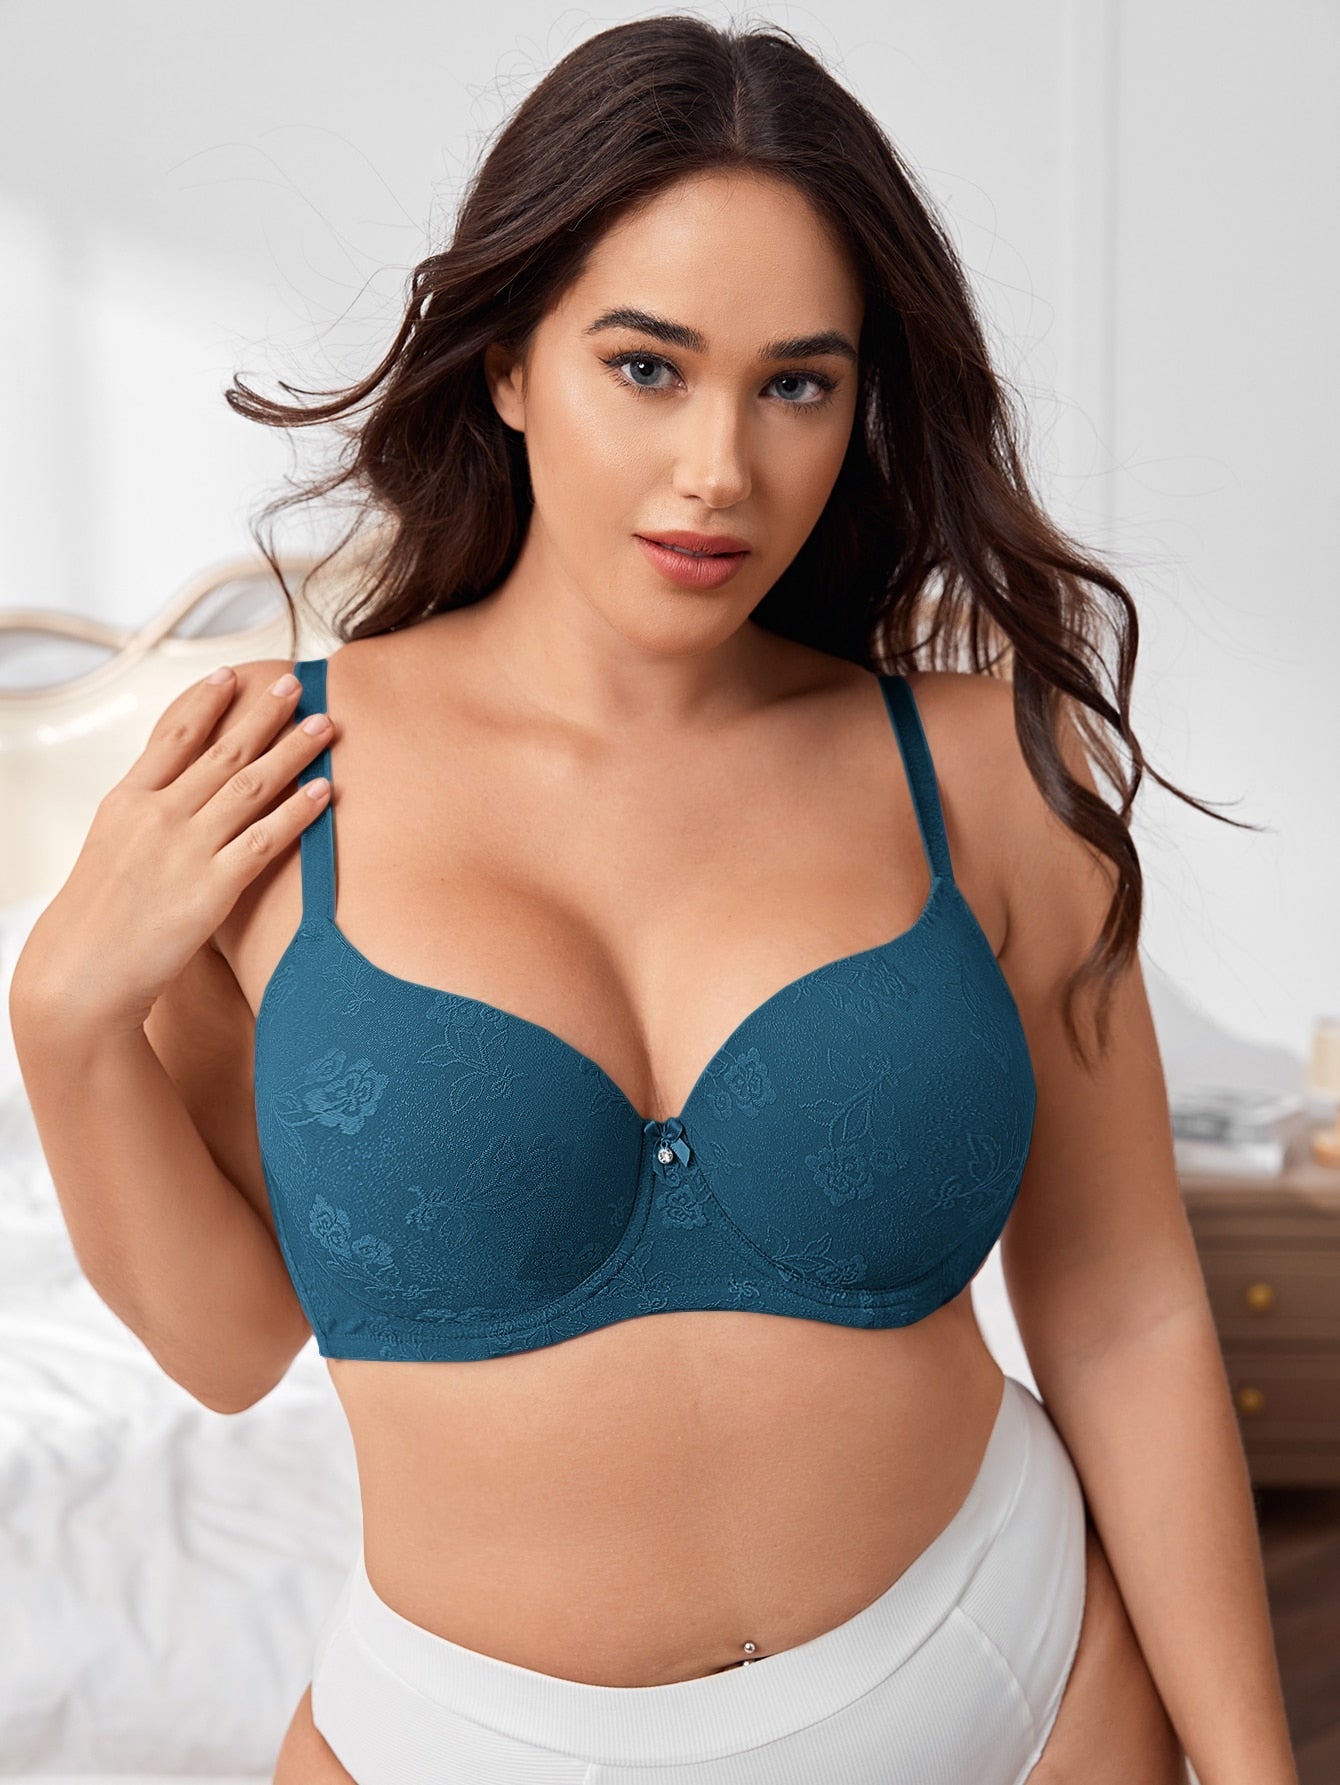 25 Plus Size Pakistan Bras That Will Make You Look And Feel